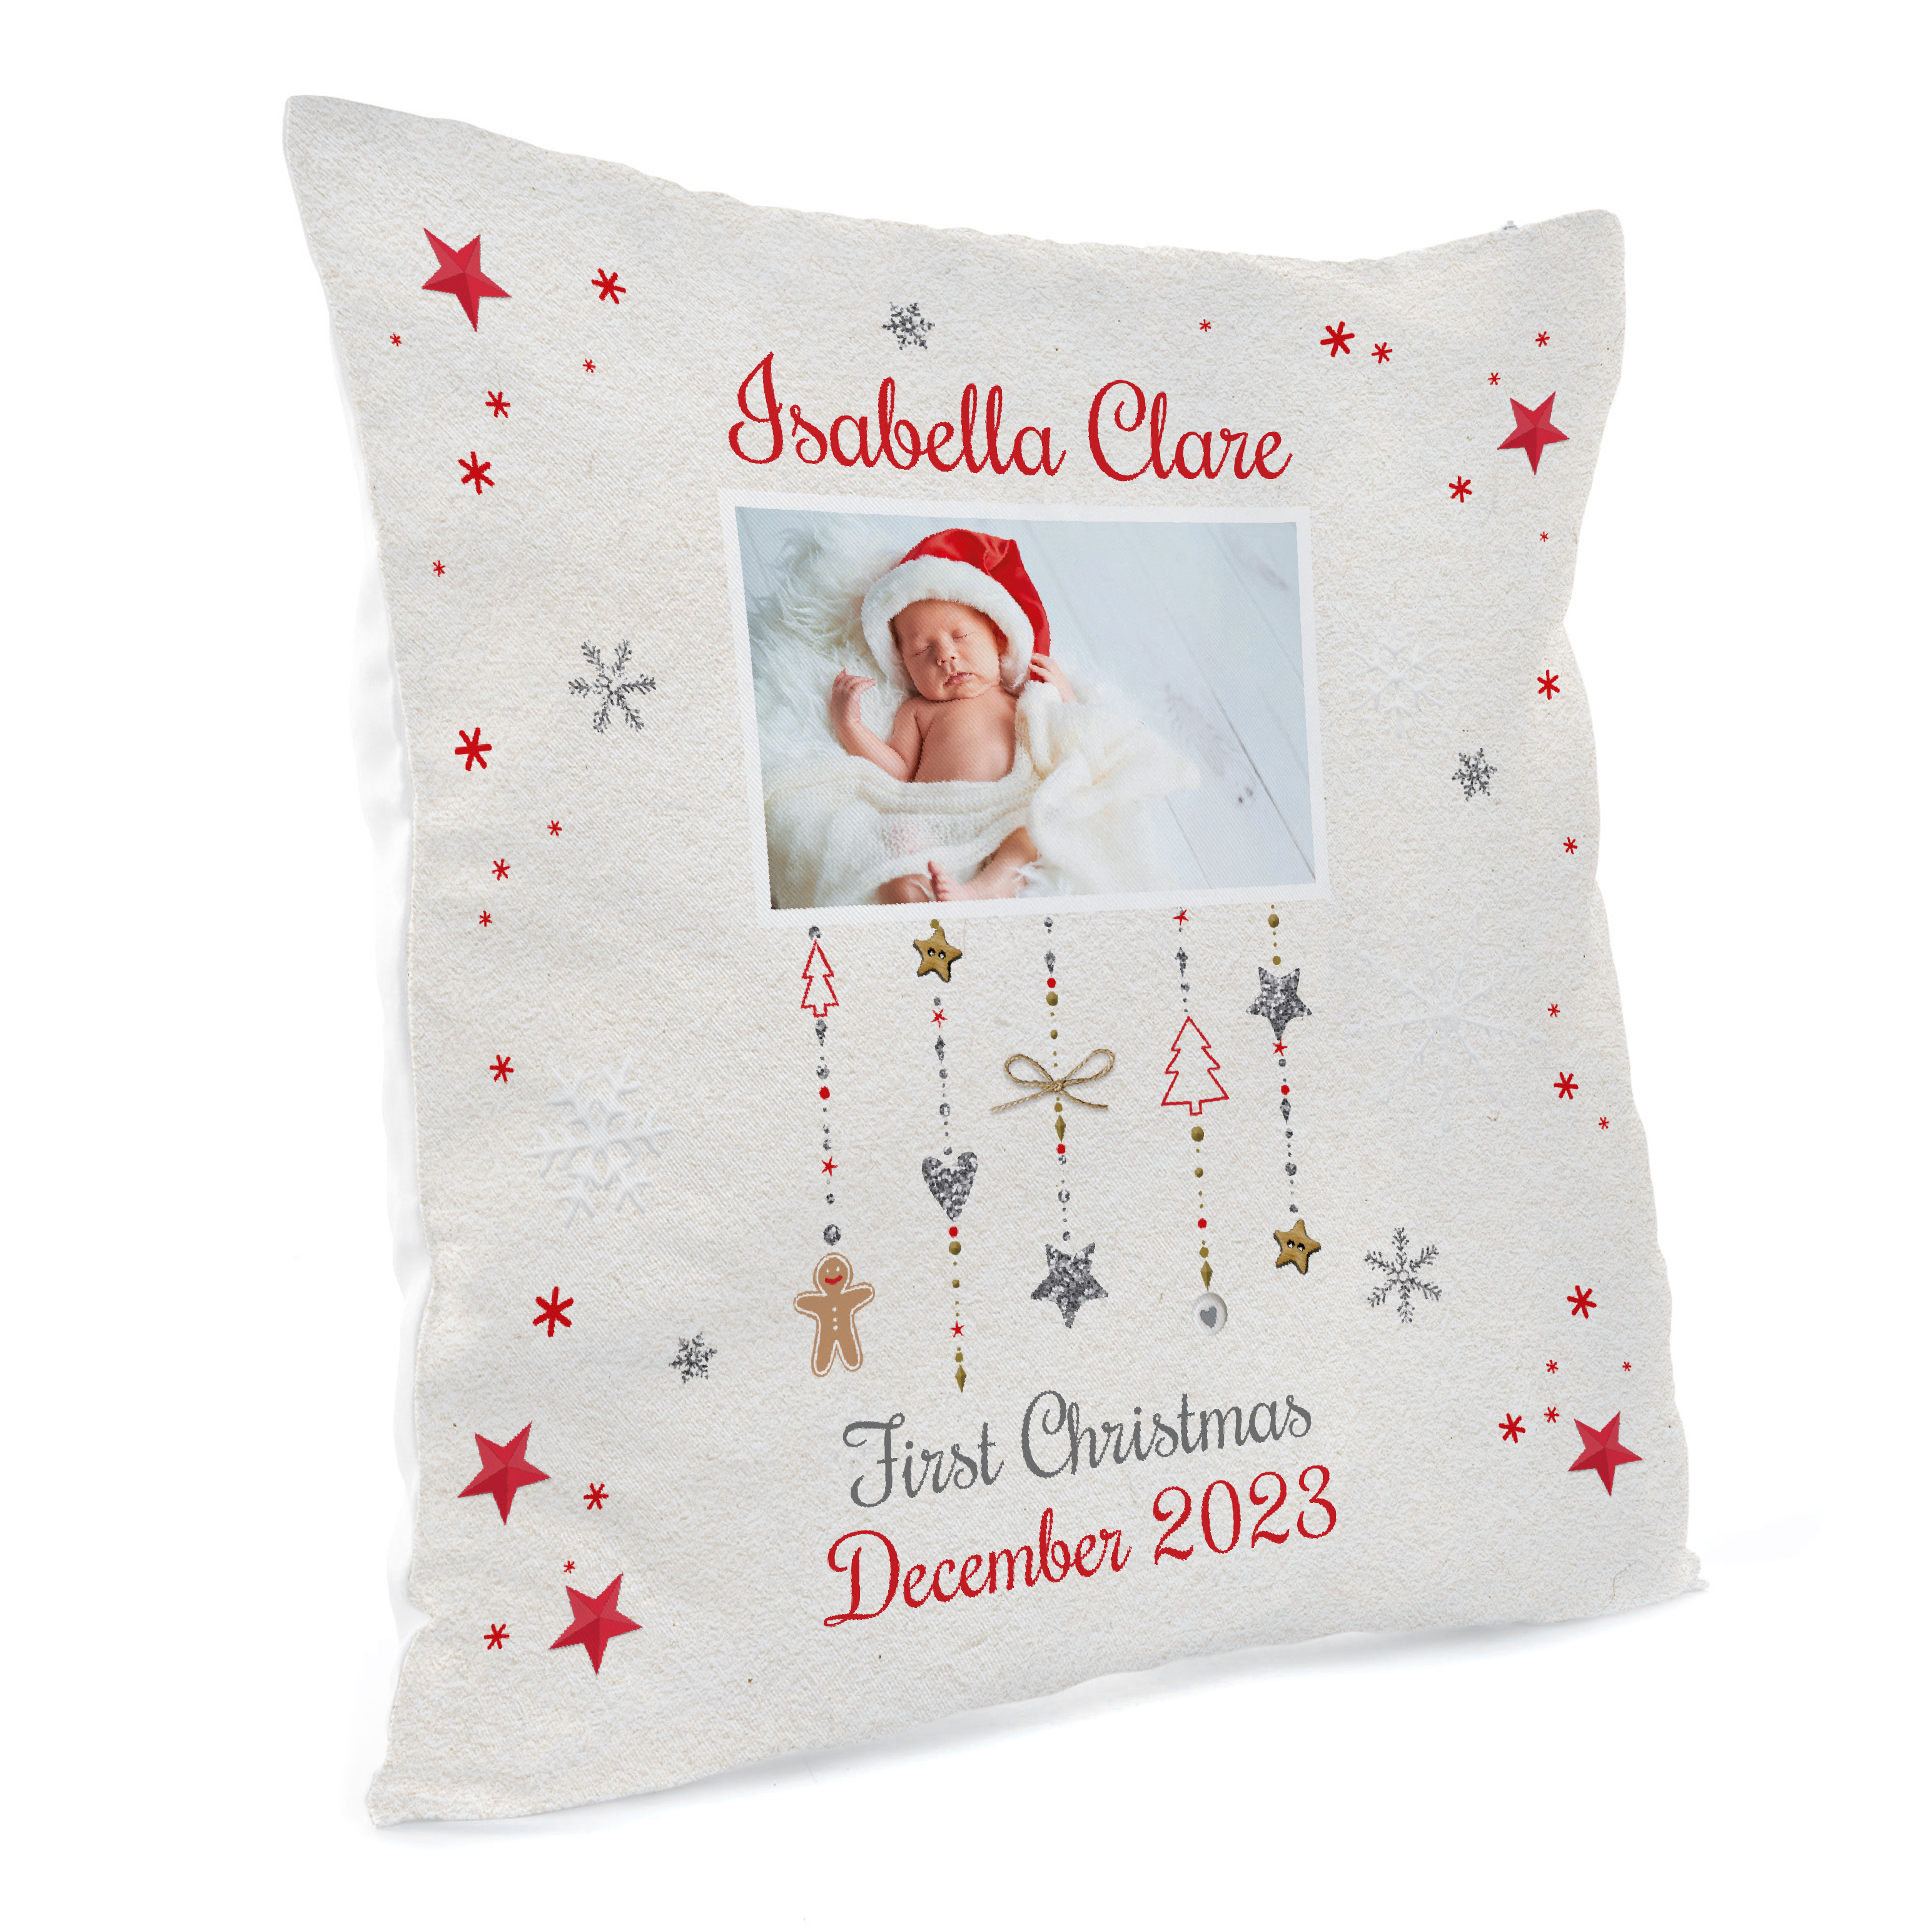 Personalised Photo Cushion - Baby's First Christmas 